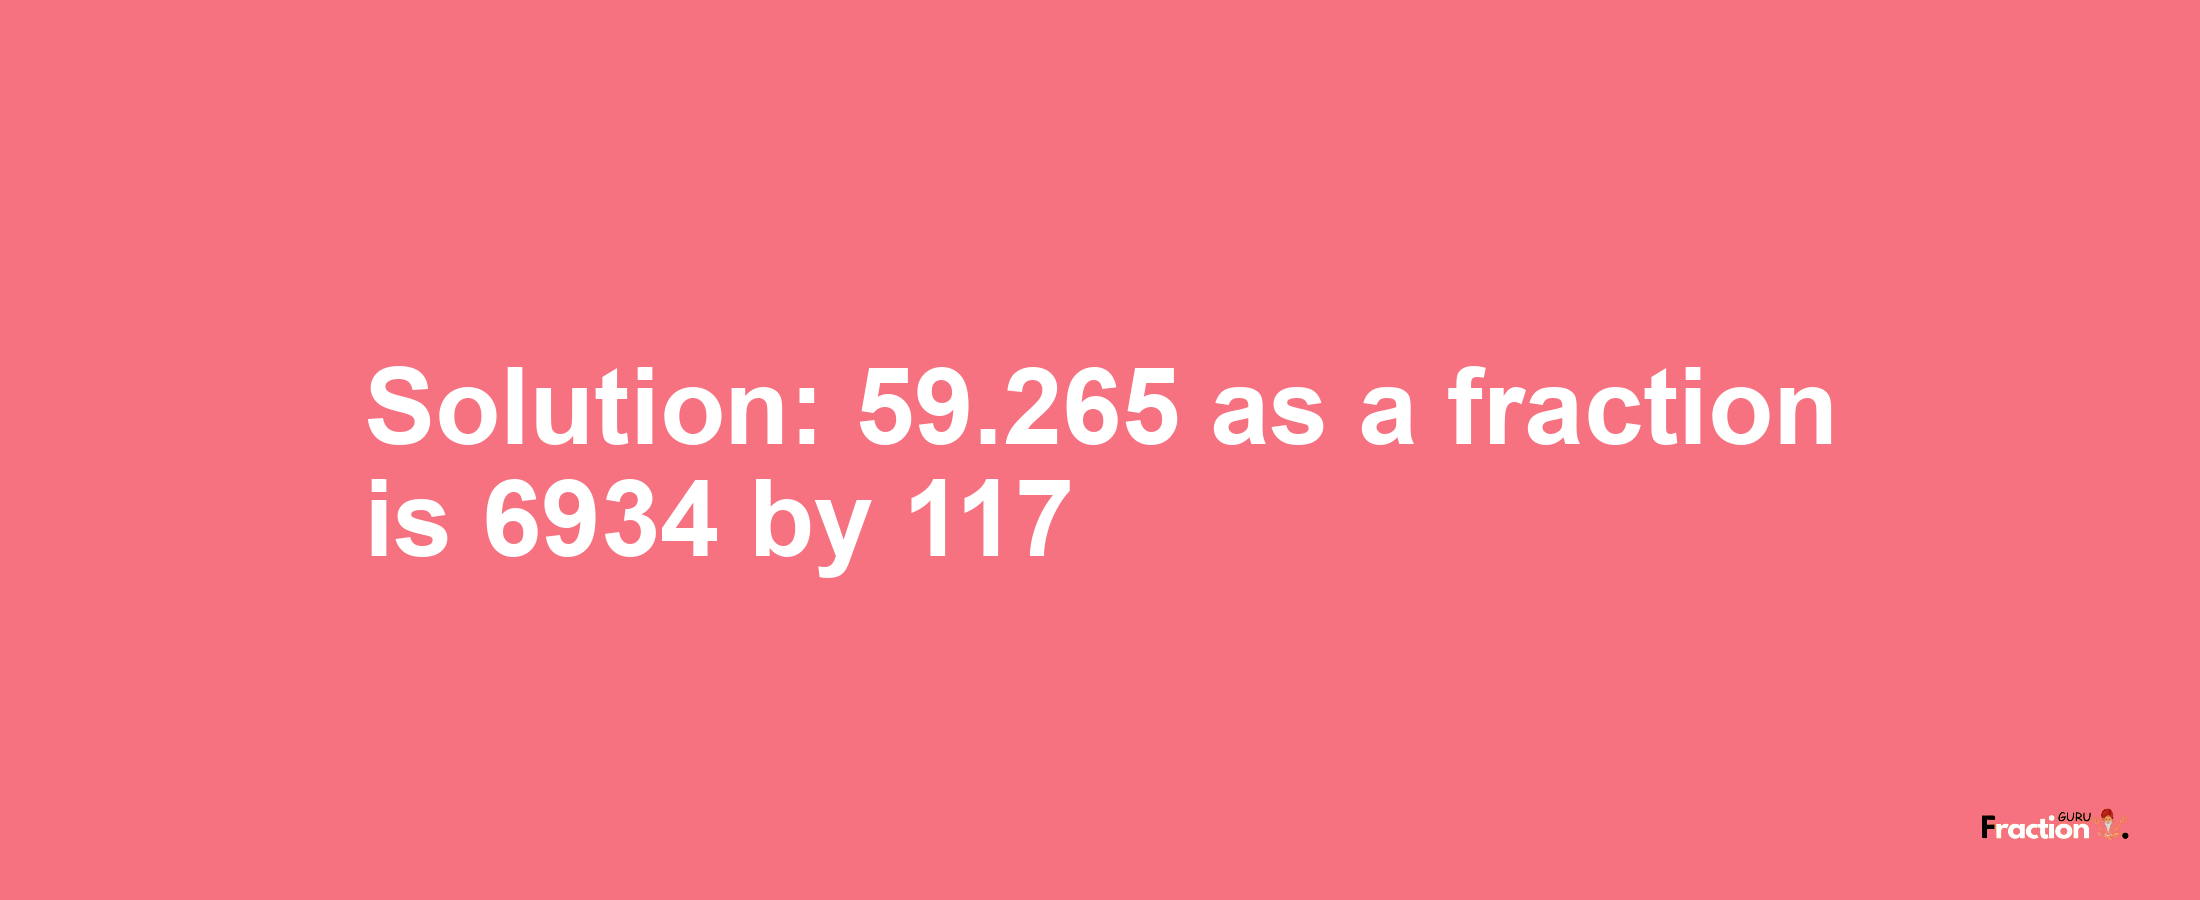 Solution:59.265 as a fraction is 6934/117